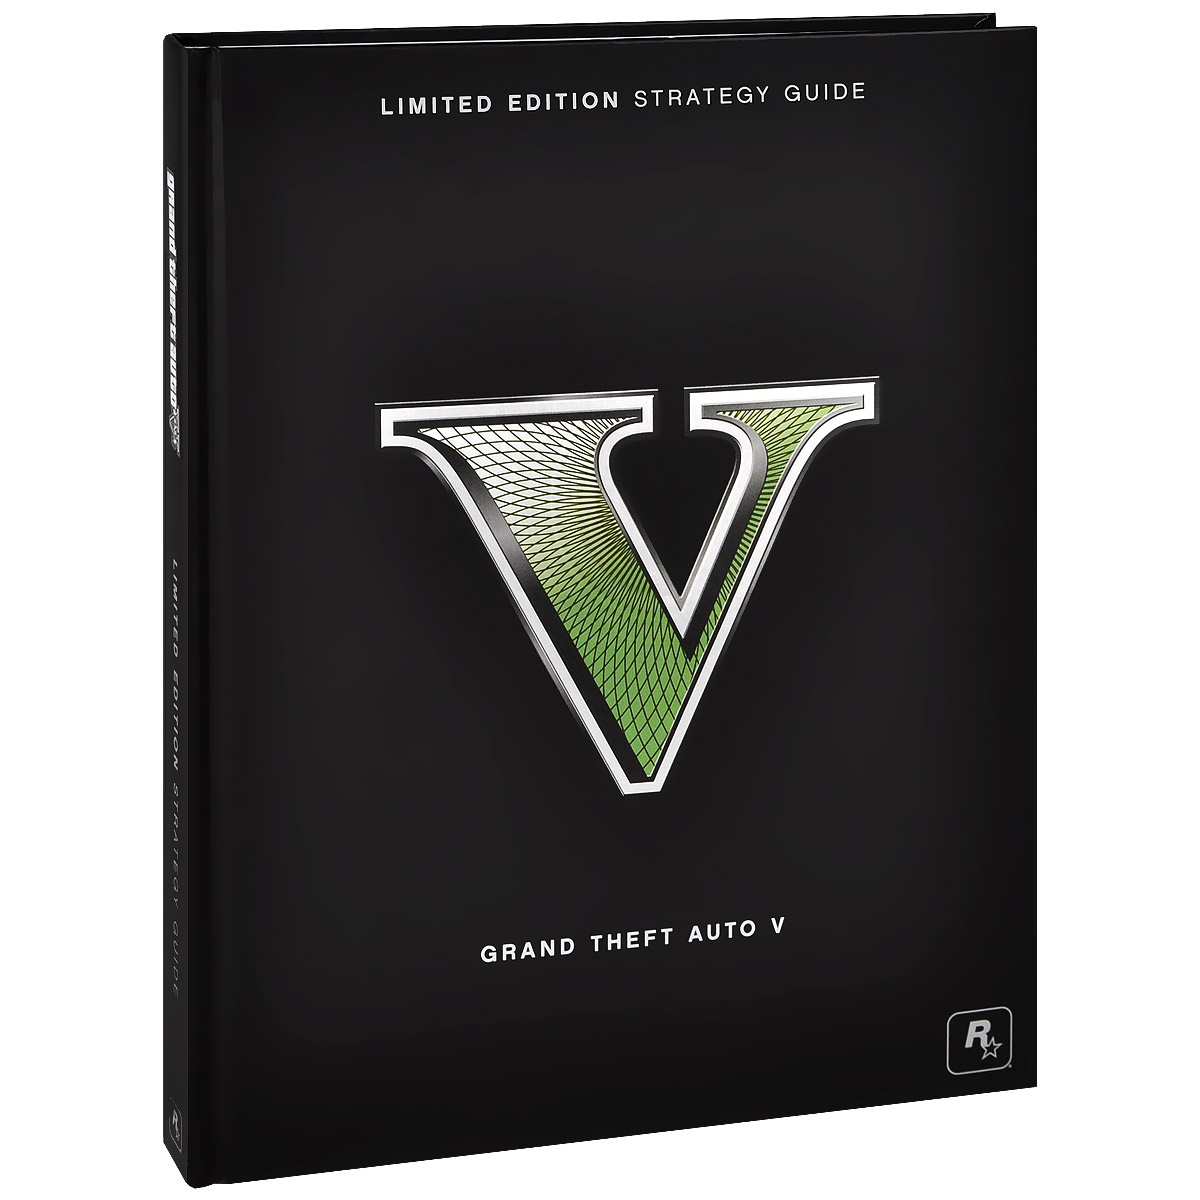 Gta 5 limited edition strategy guide (120) фото